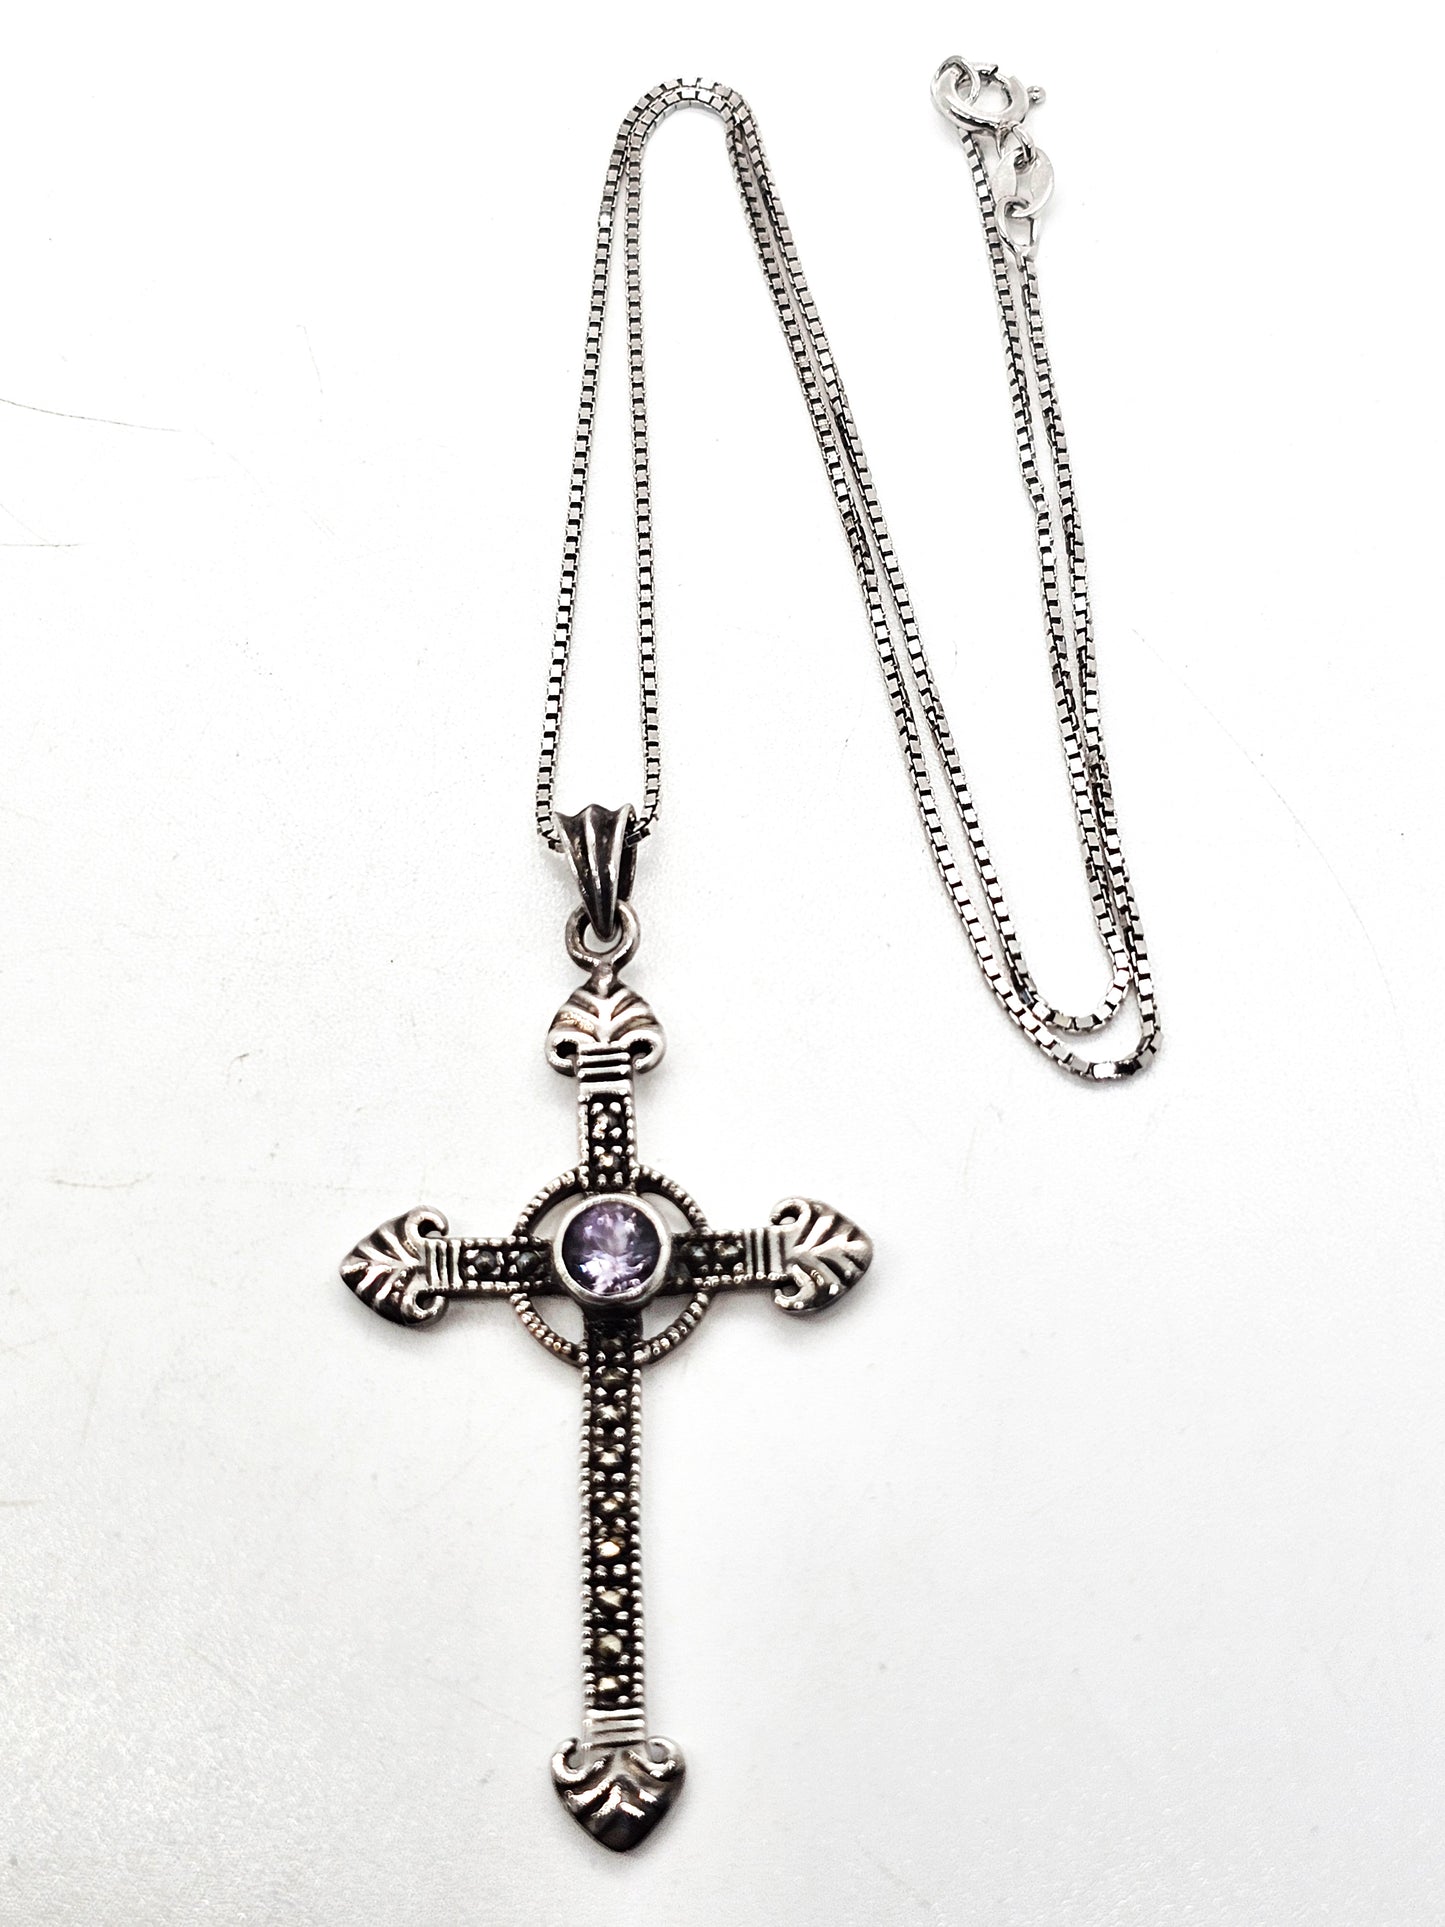 Amethyst and Marcasite SU sterling silver vintage  cross pendant necklace